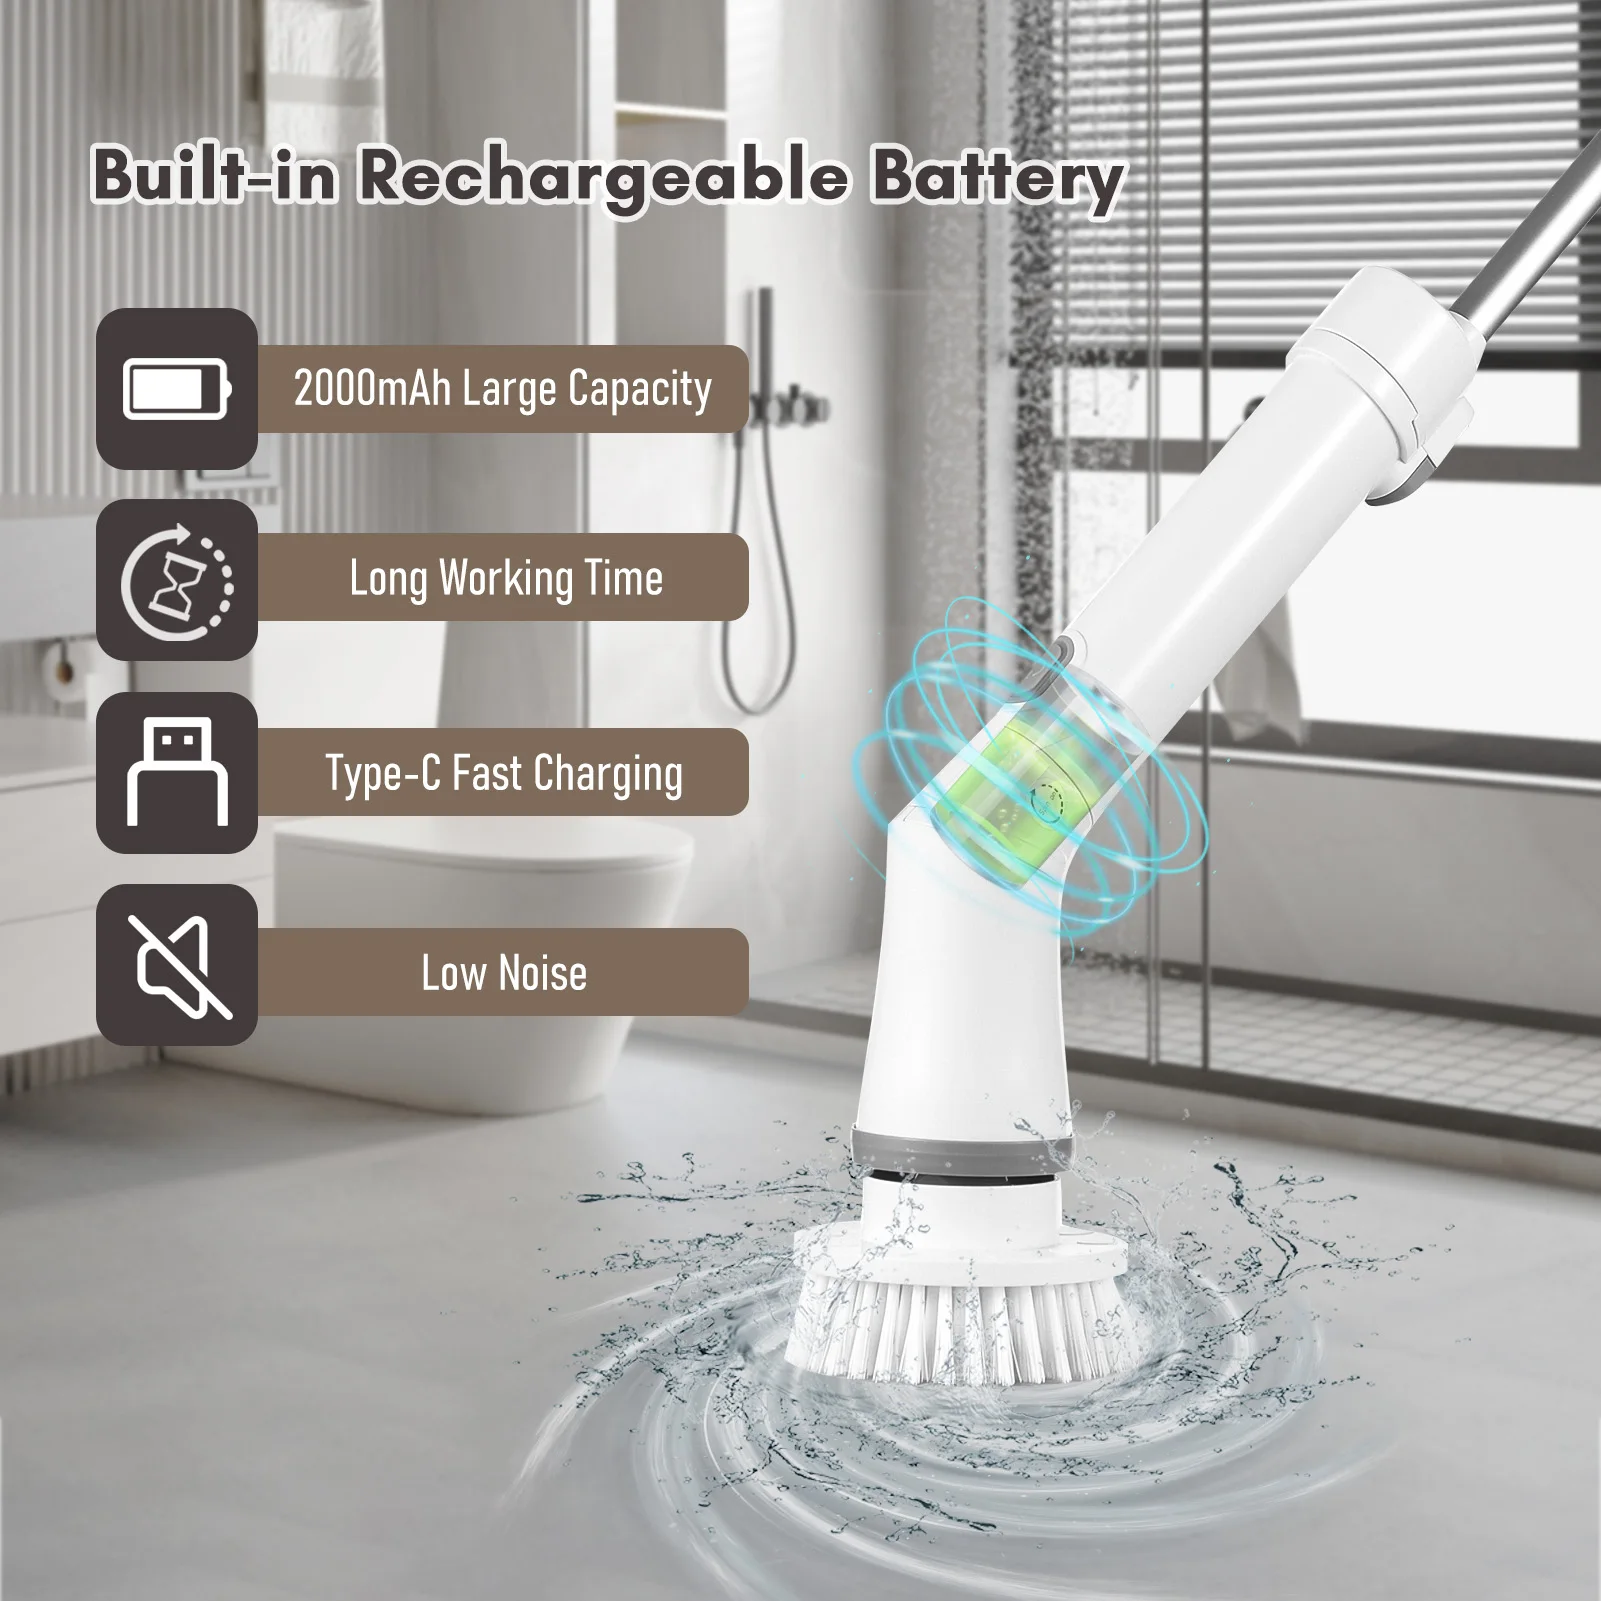 https://ae01.alicdn.com/kf/Seee3318bab7d48e4a4609355a193066am/Electric-Spin-Scrubber-Handheld-Cordless-Electric-Cleaning-Brush-2-Speeds-Adjustable-with-Extension-Rod-6-Replaceable.jpg